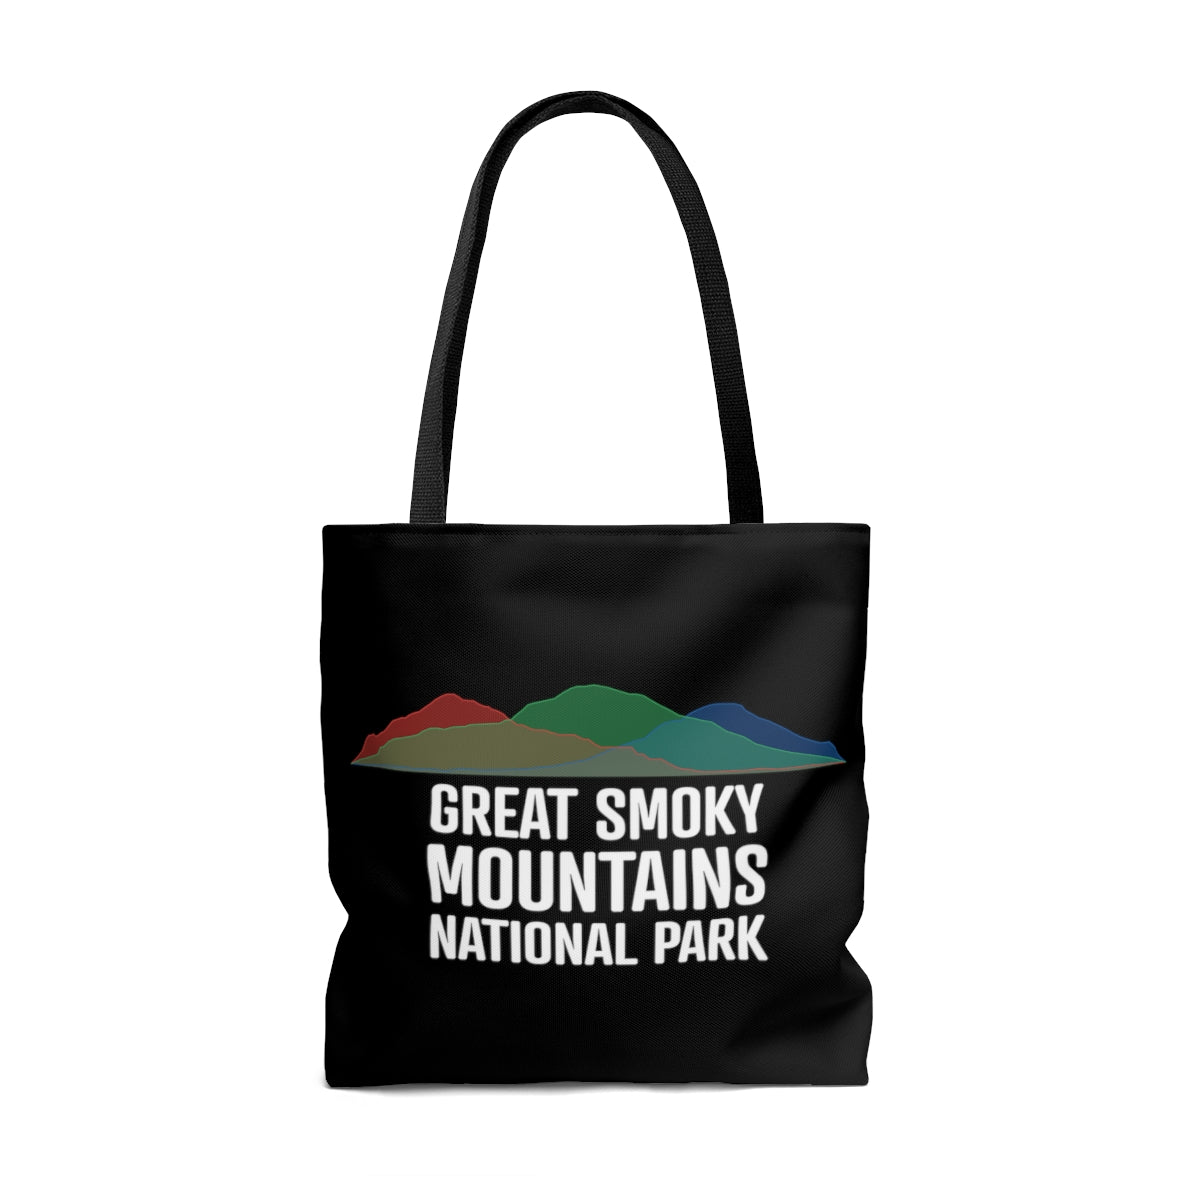 Great Smoky Mountains National Park Tote Bag - Histogram